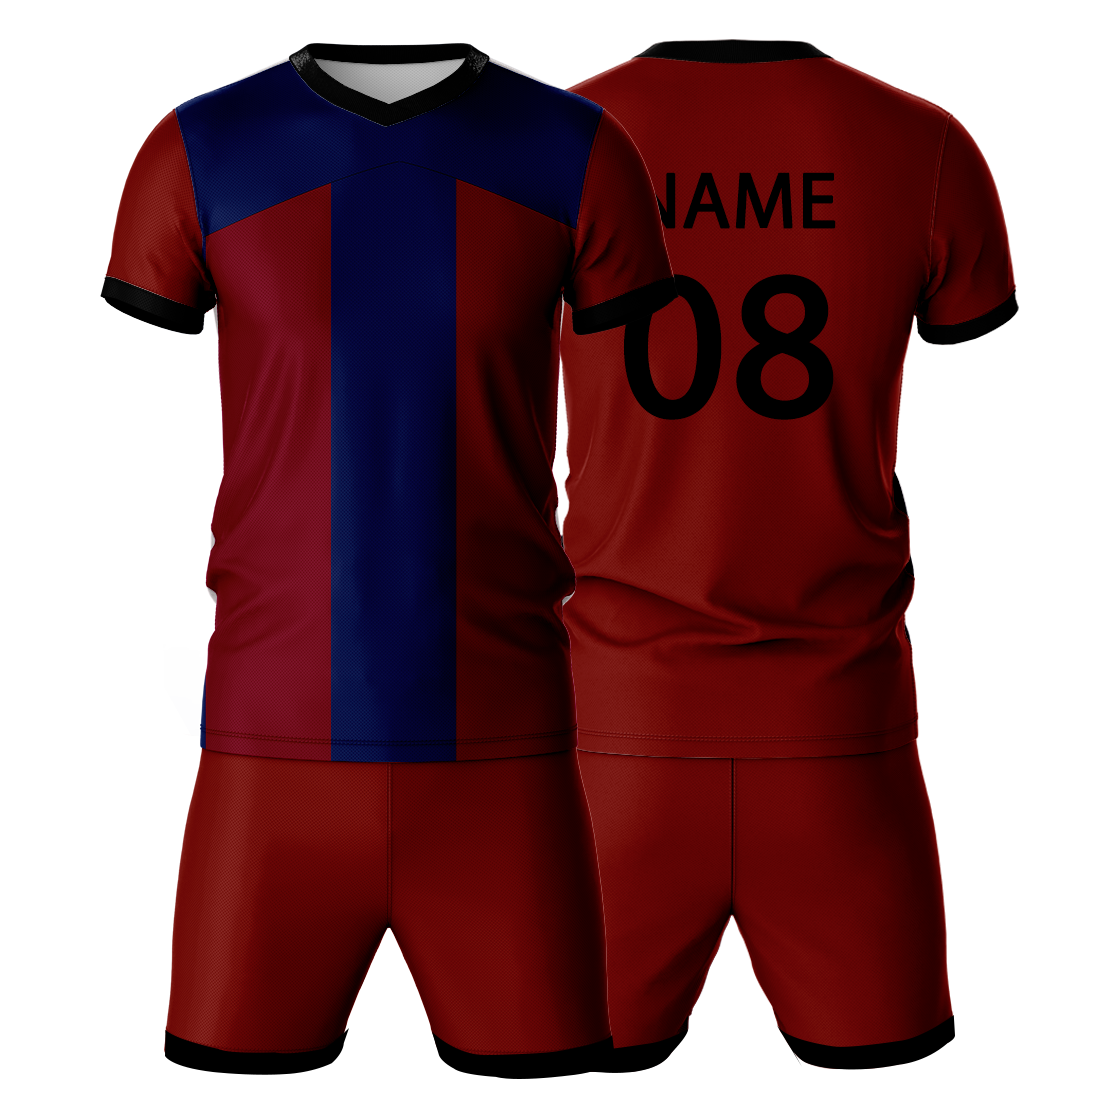 All Over Printed Jersey With Shorts Name & Number Printed.NP50000679